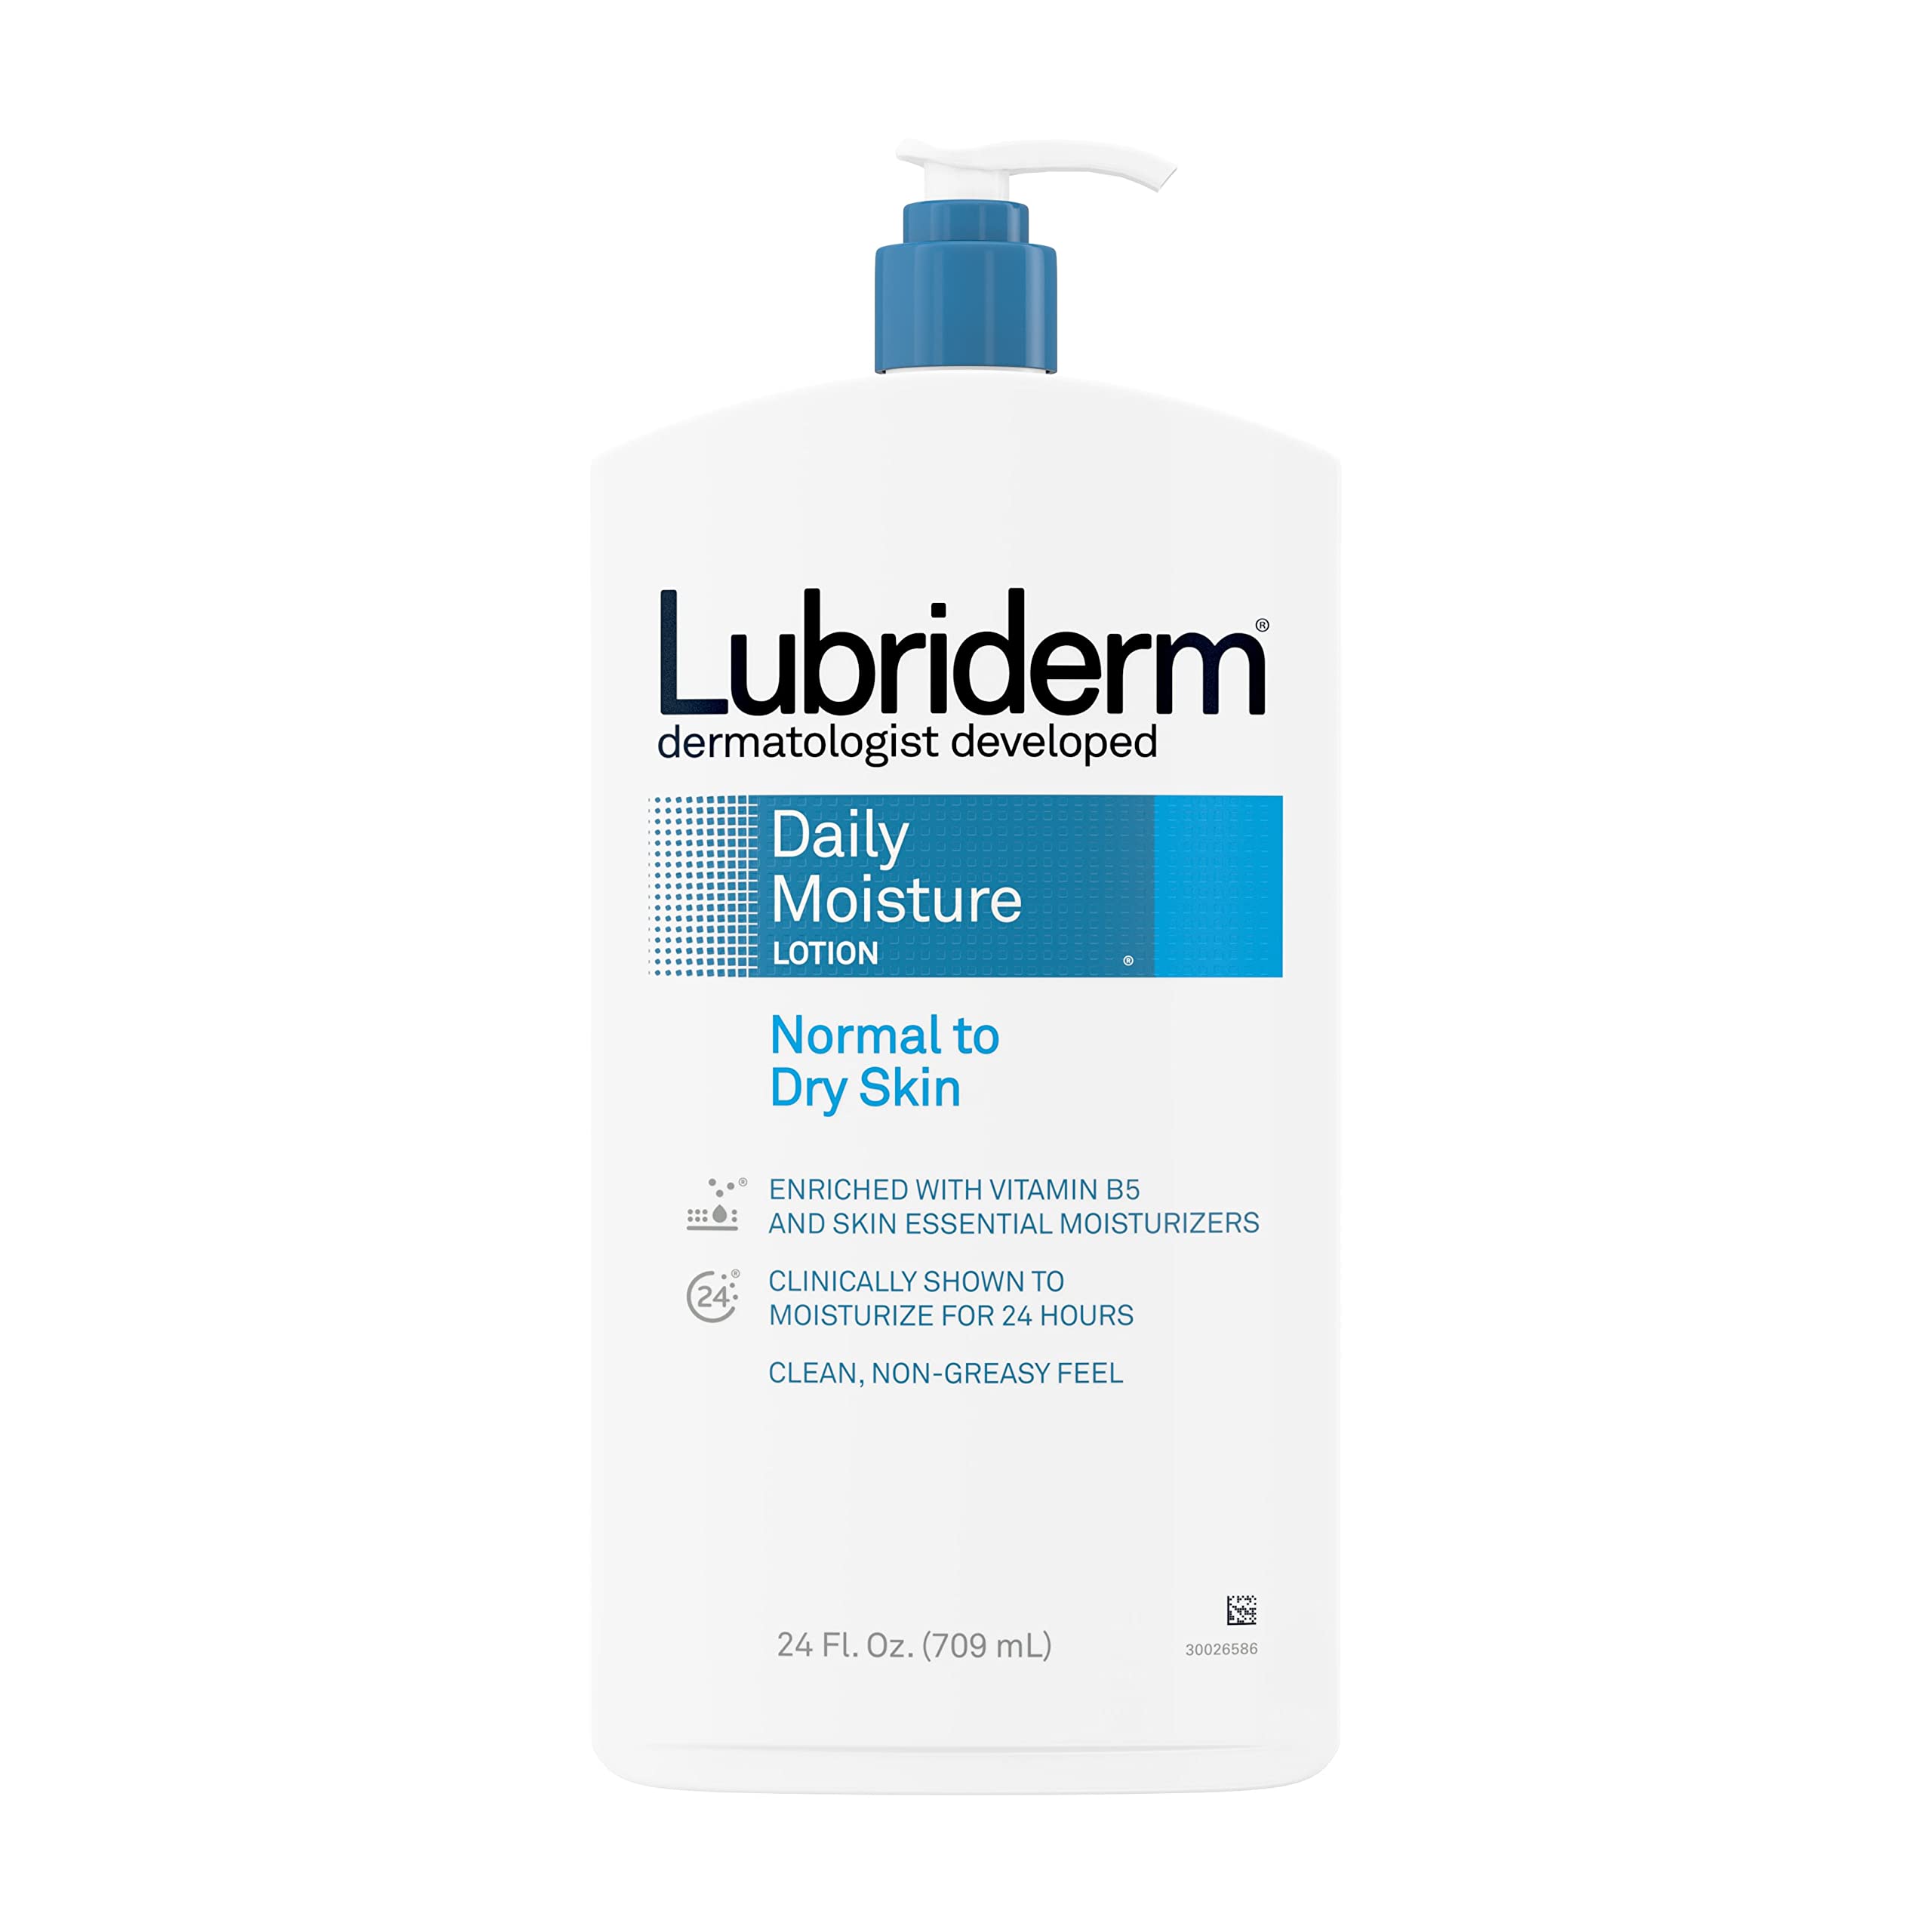 Lubriderm Daily Moisture Hydrating Body and Hand Lotion To Help Moisturize Dry Skin with Pro-Vitamin B5 For Healthy-Looking Skin, Non-Greasy, 24 fl. oz